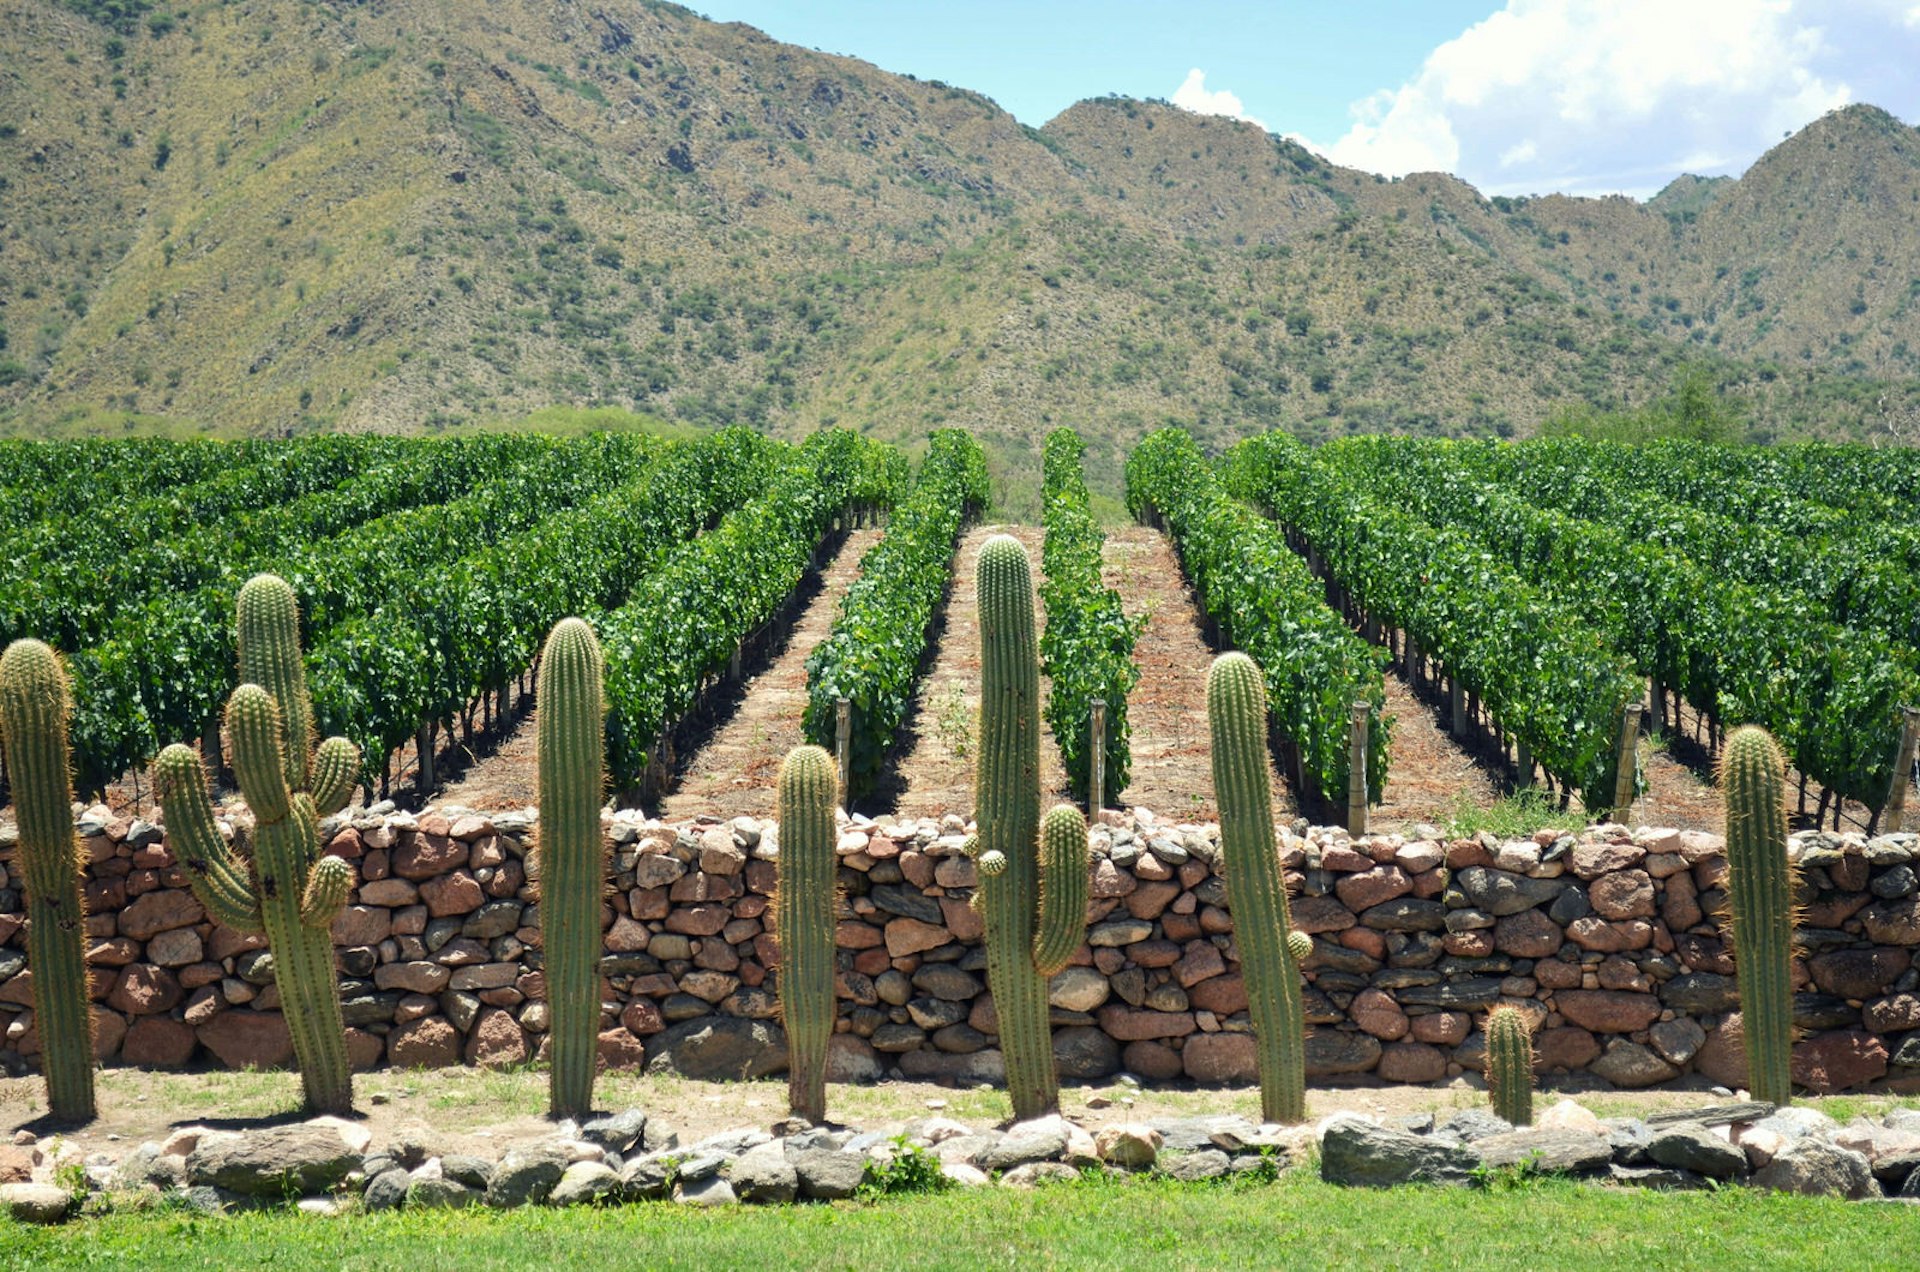 Check out Argentina's 'other' wine country © ceciangiocchi / Getty Images